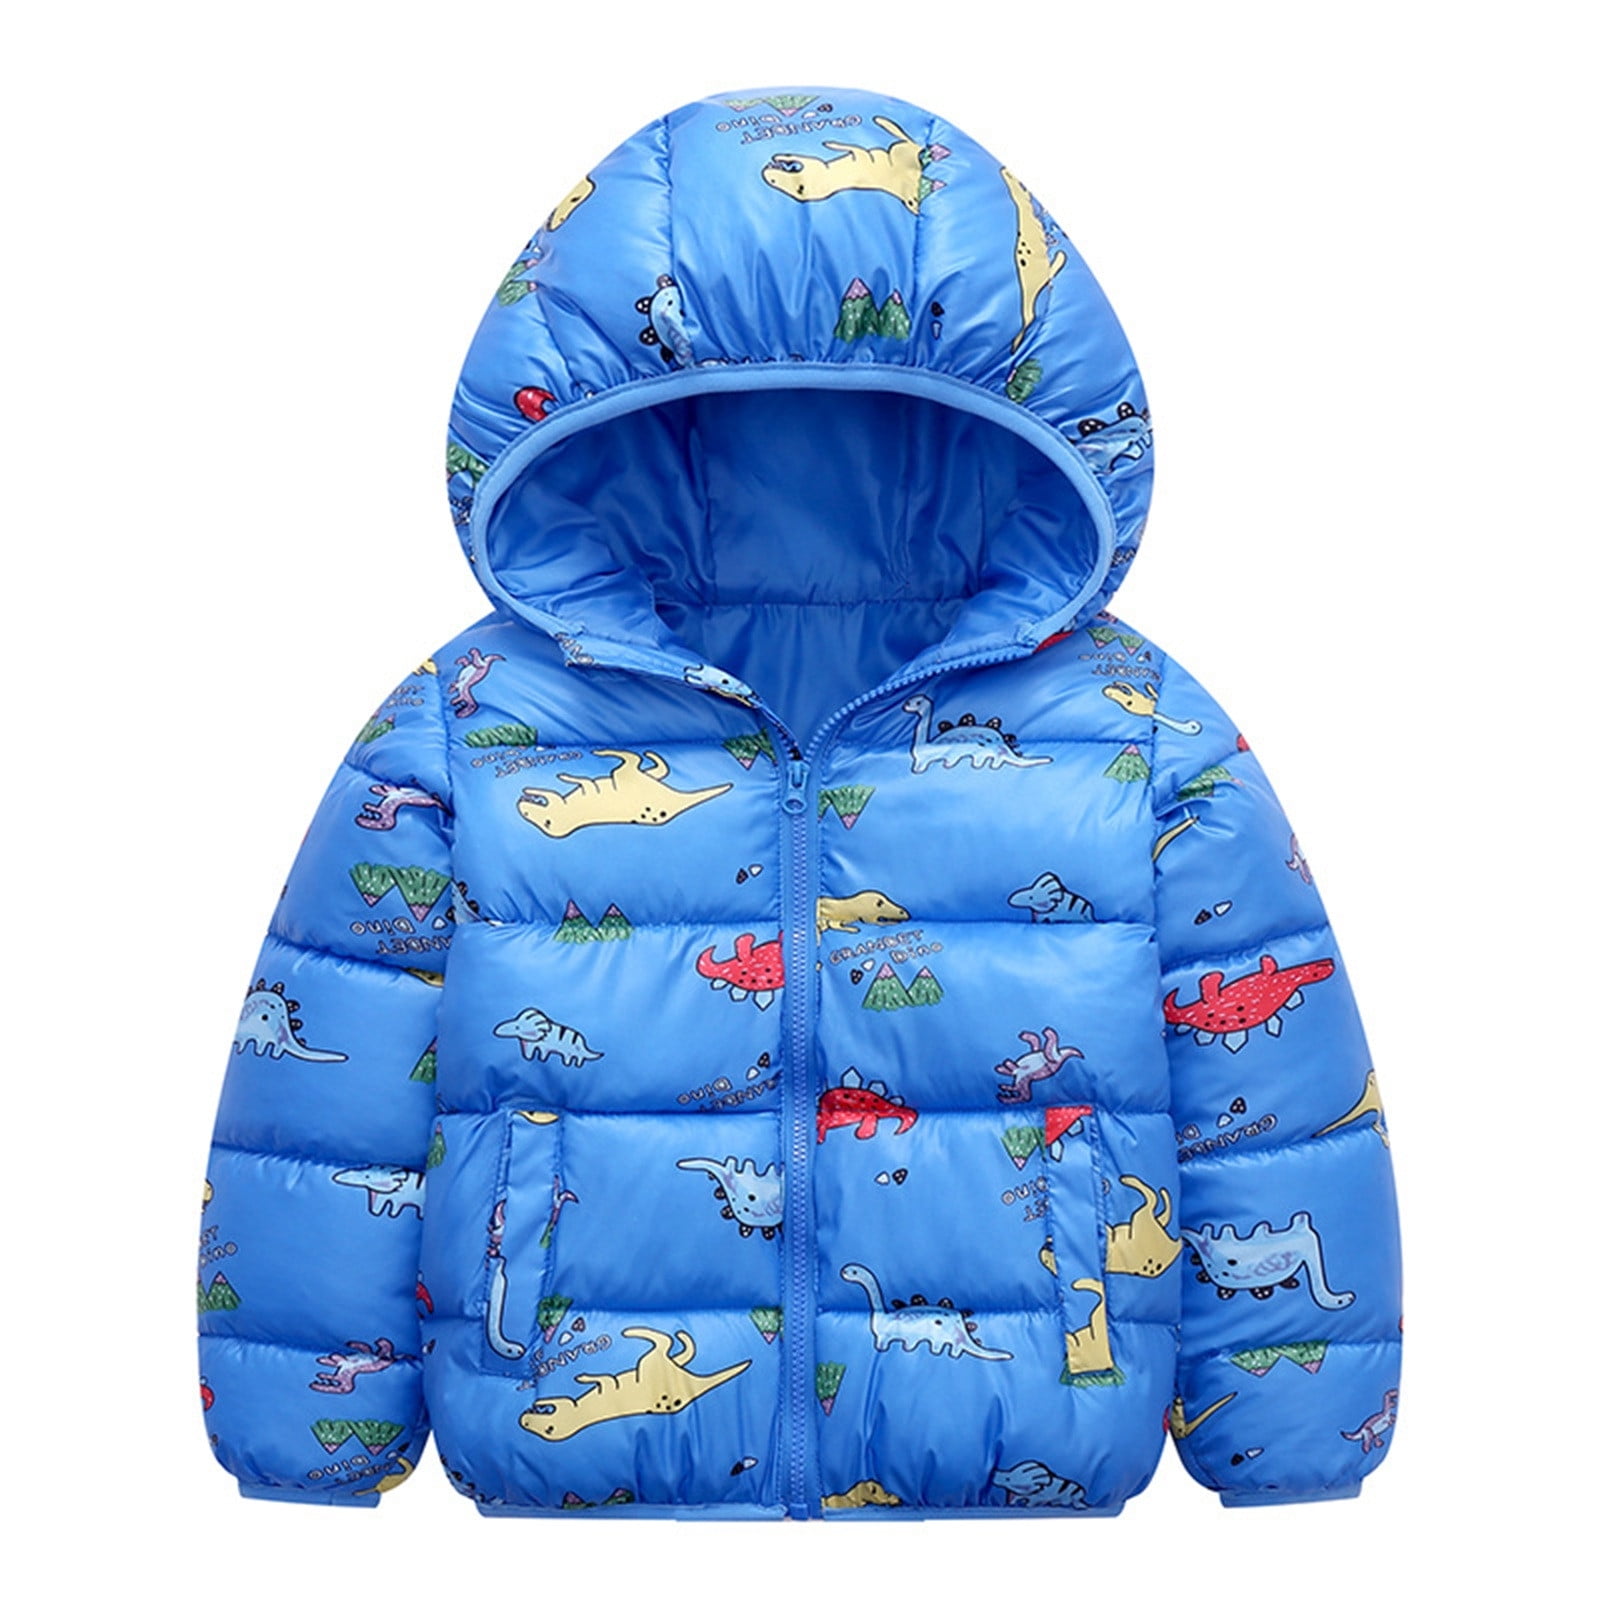 adviicd Boys' Outerwear Jackets & Coats Toddler Boys Jackets 4t Toddler ...